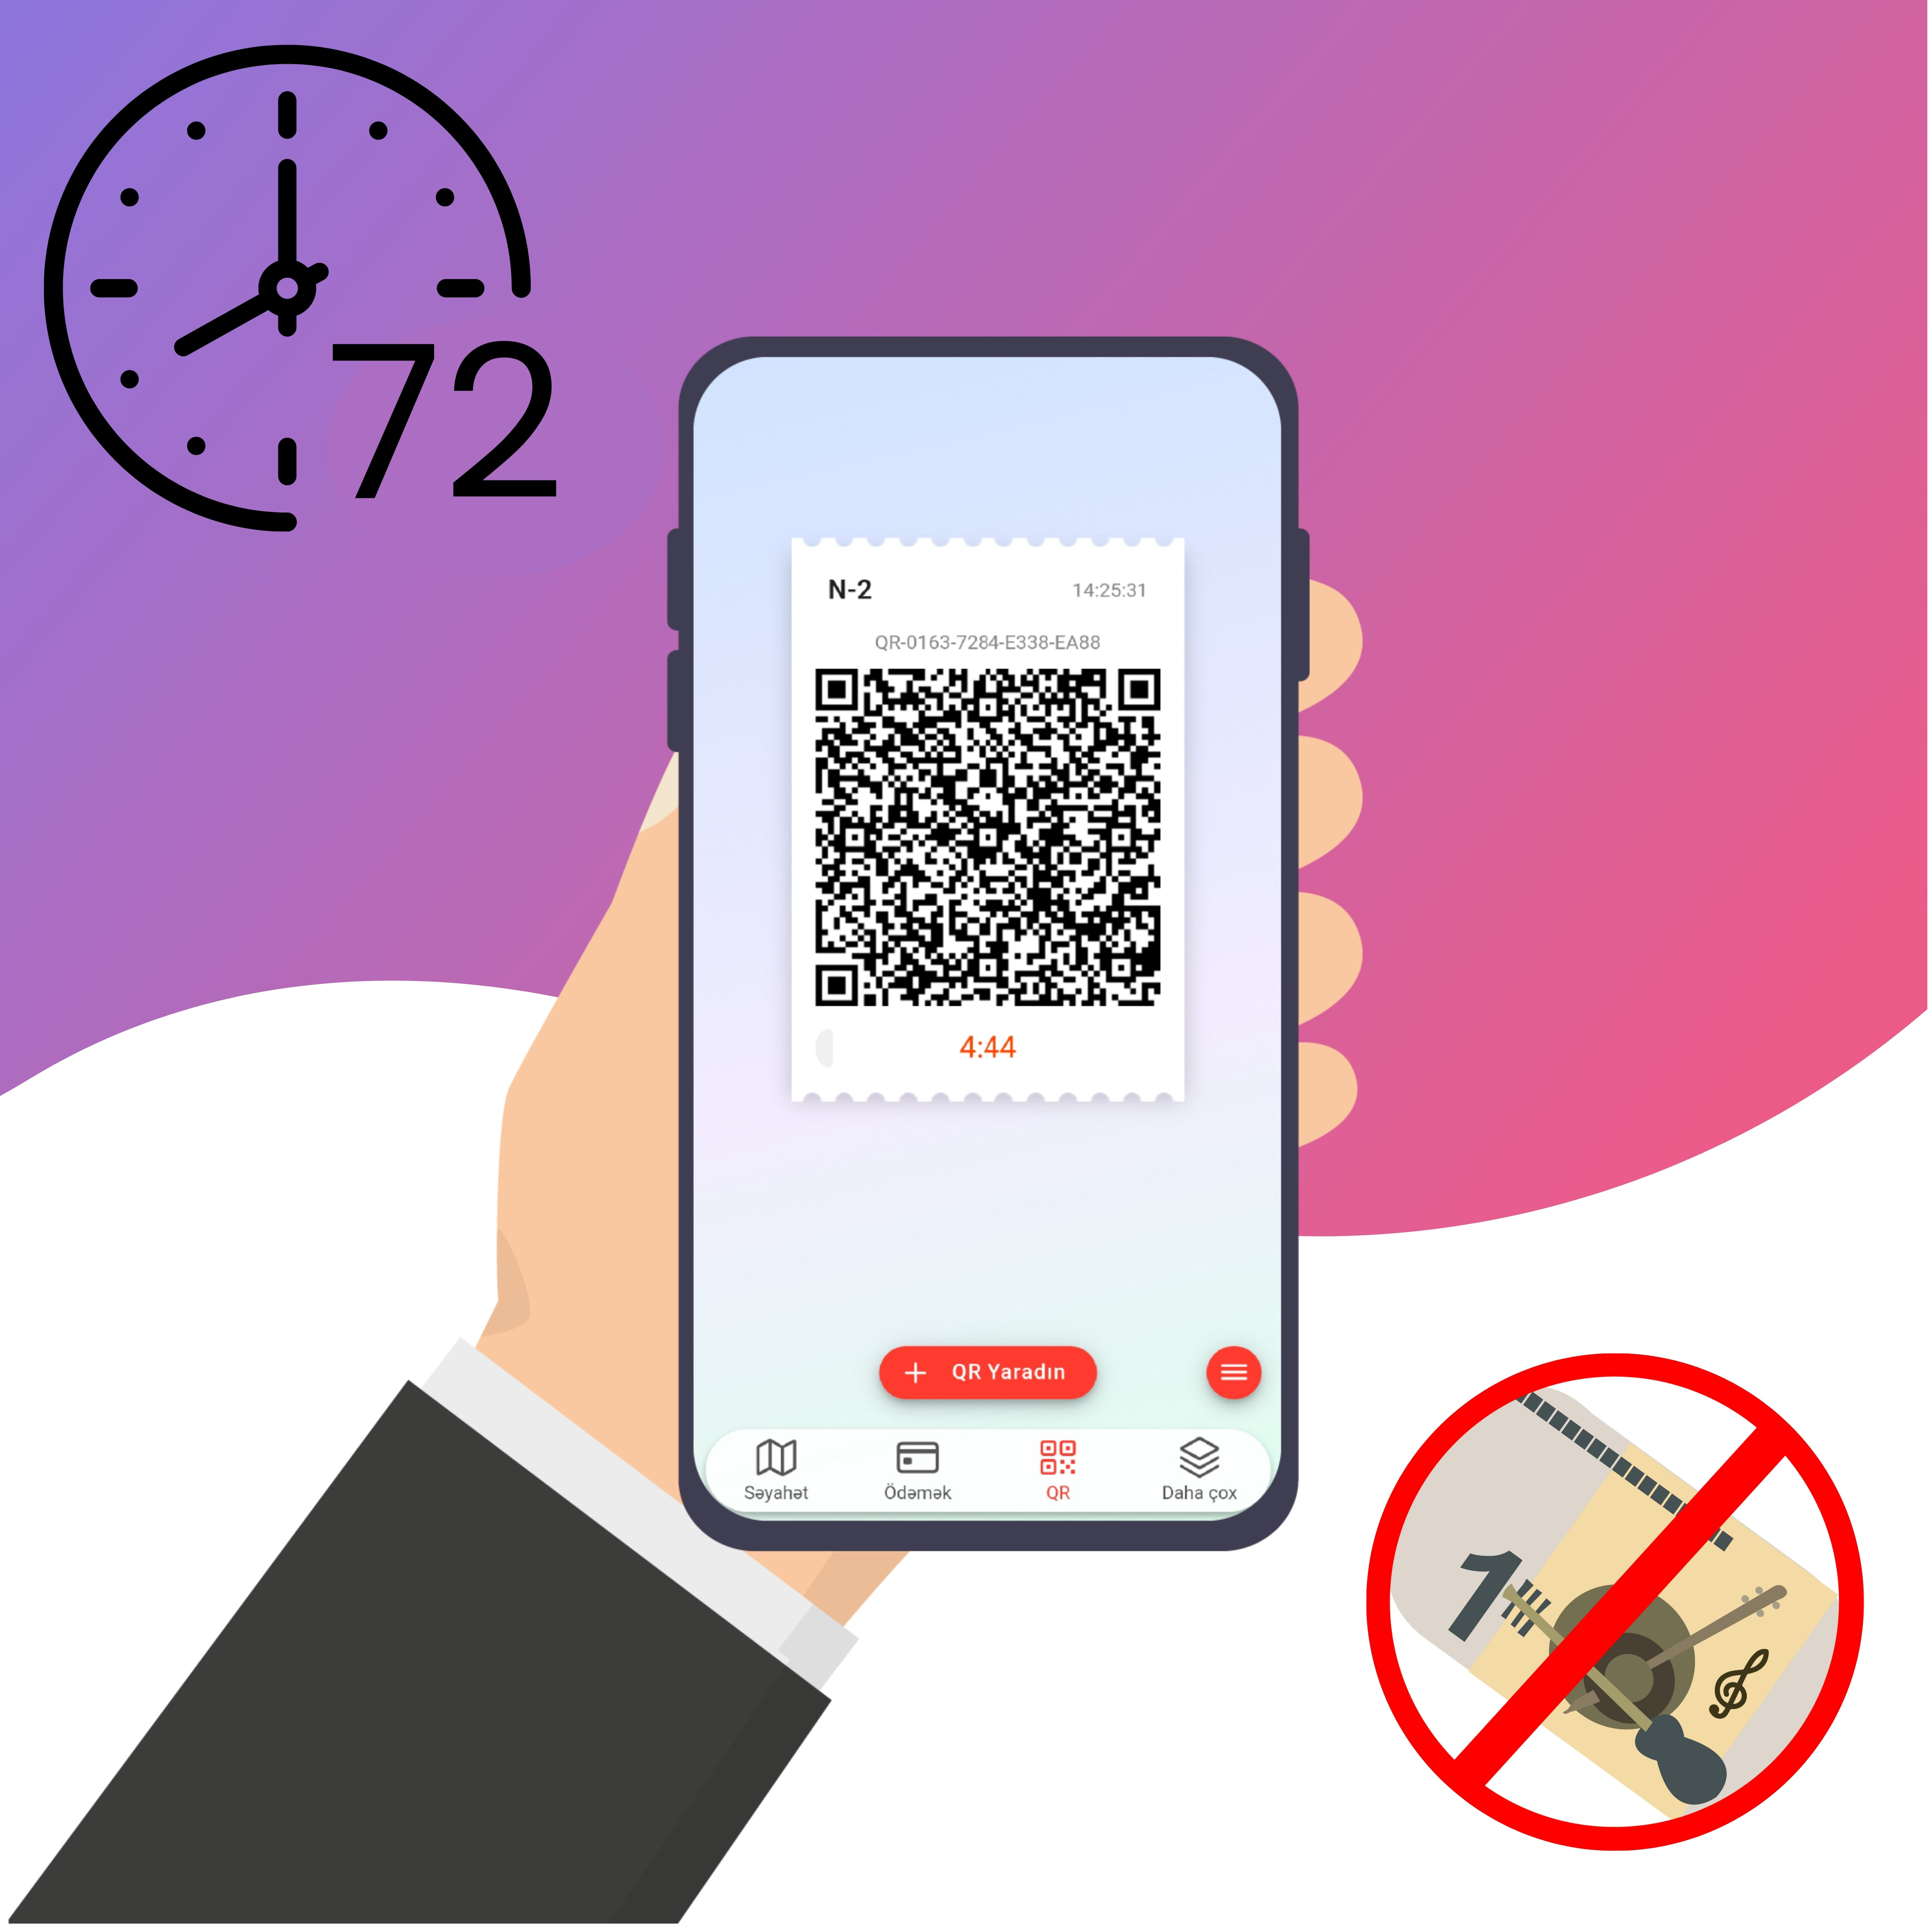 If a QR ticket goes unused within 5 minutes, the blocked amount will be refunded to you...